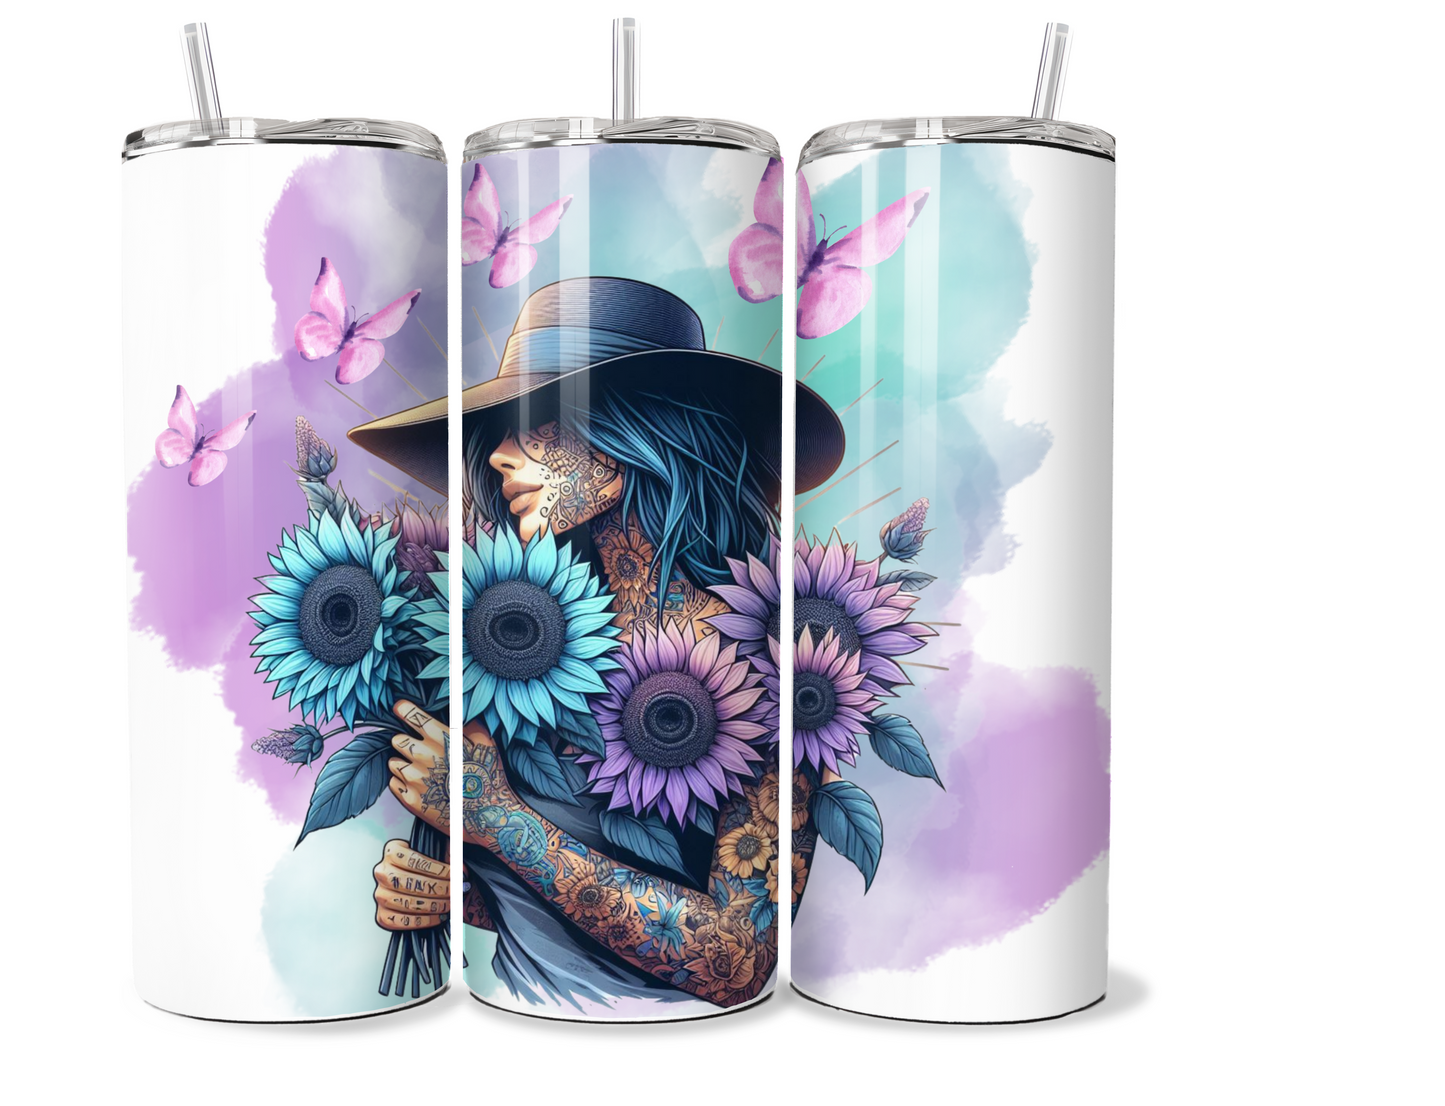 20 oz stainless steel double walled Tumbler, tattooed girl, sunflower, butterfly design